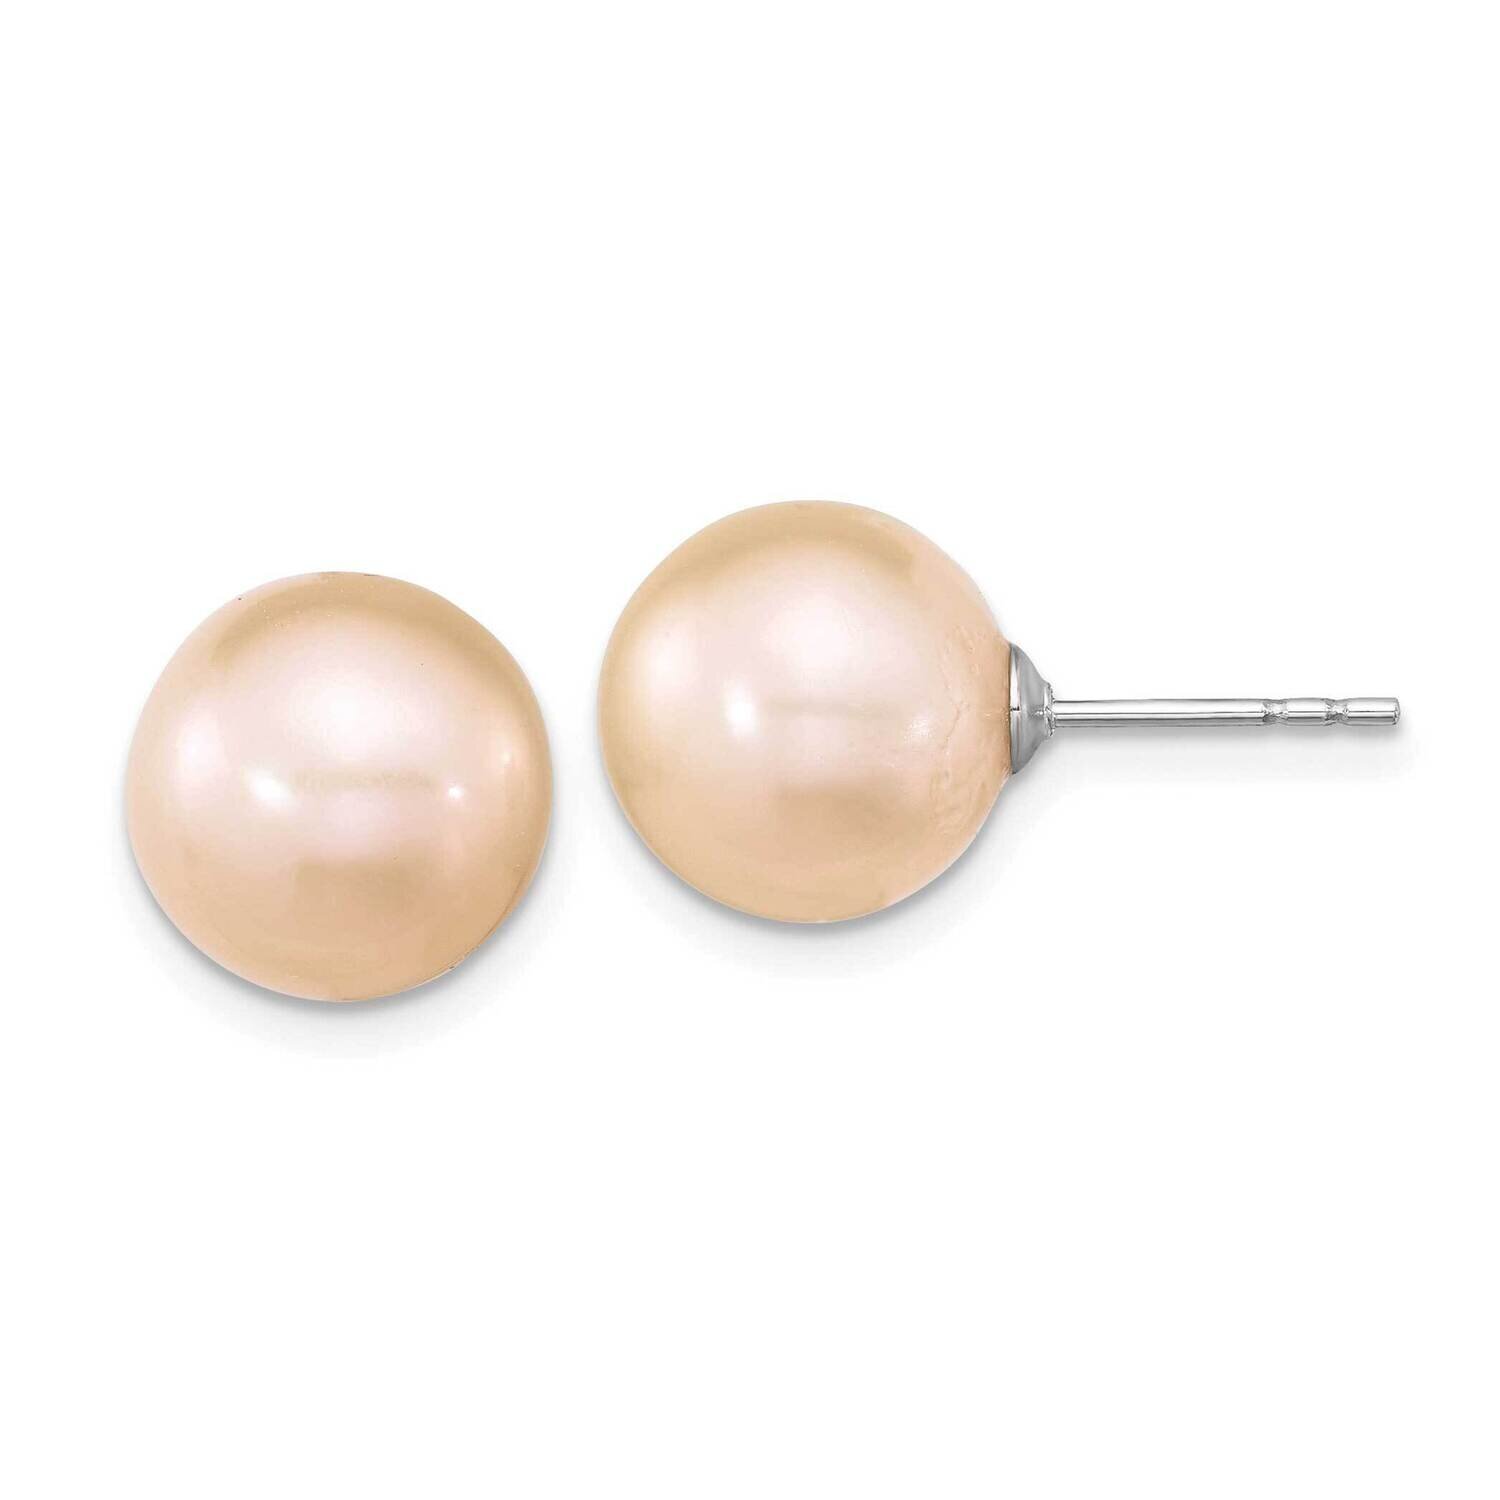 10-11mm Pink Round Fwc Pearl Post Earrings Sterling Silver Rhodium-Plated QE16326